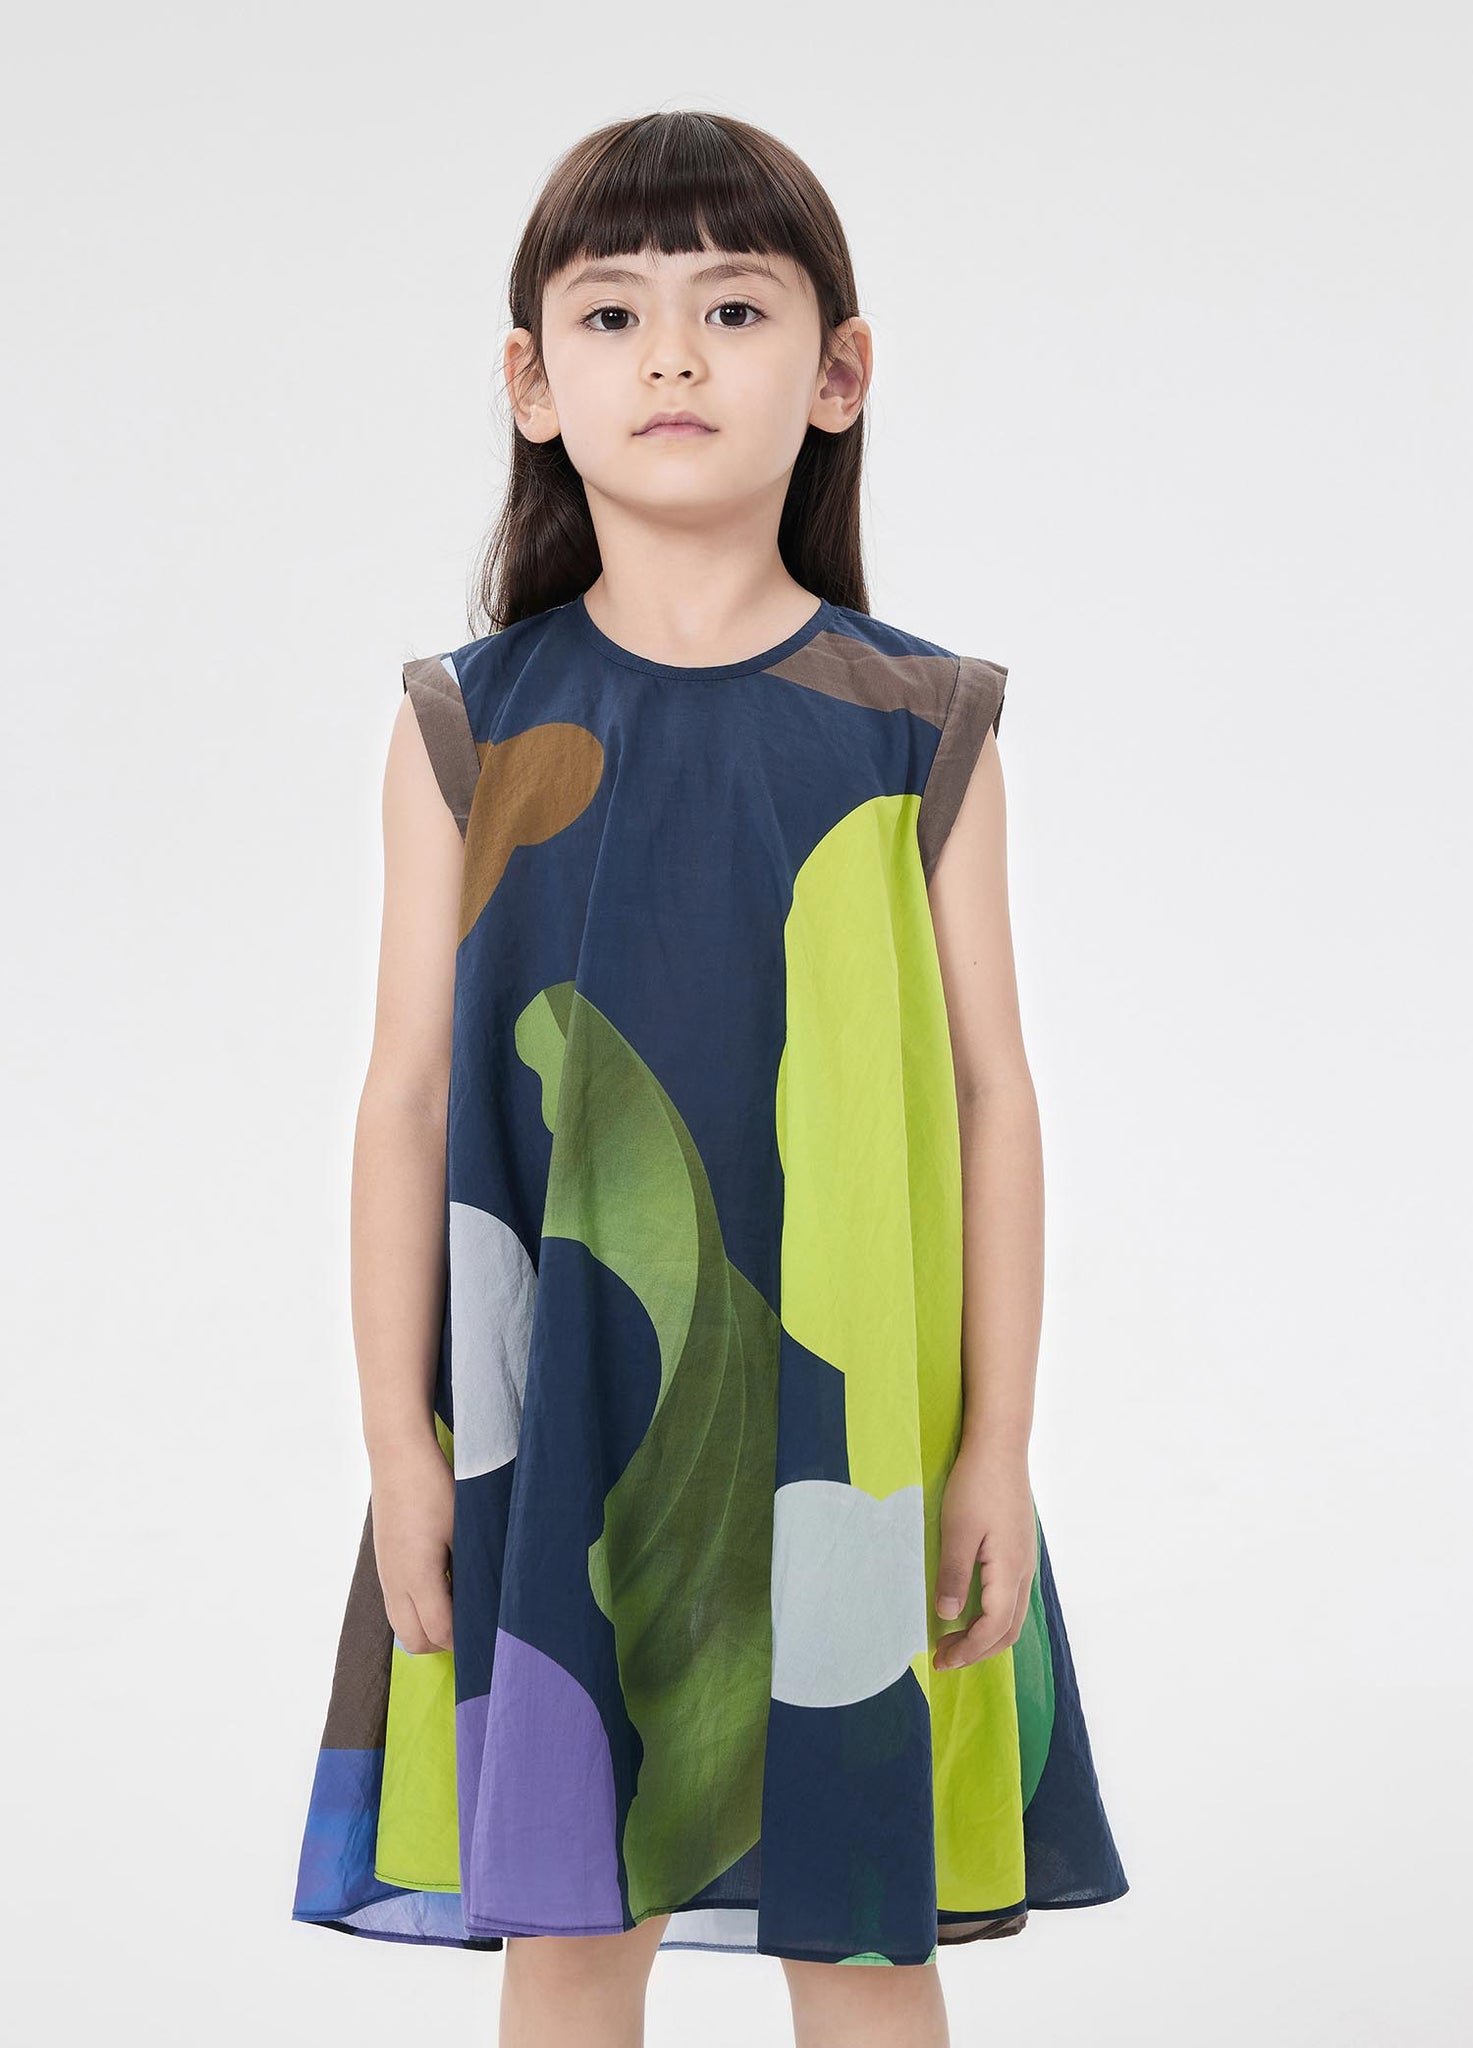 Dresses / jnby by JNBY Multi-Color Printing Sleeveless Dress